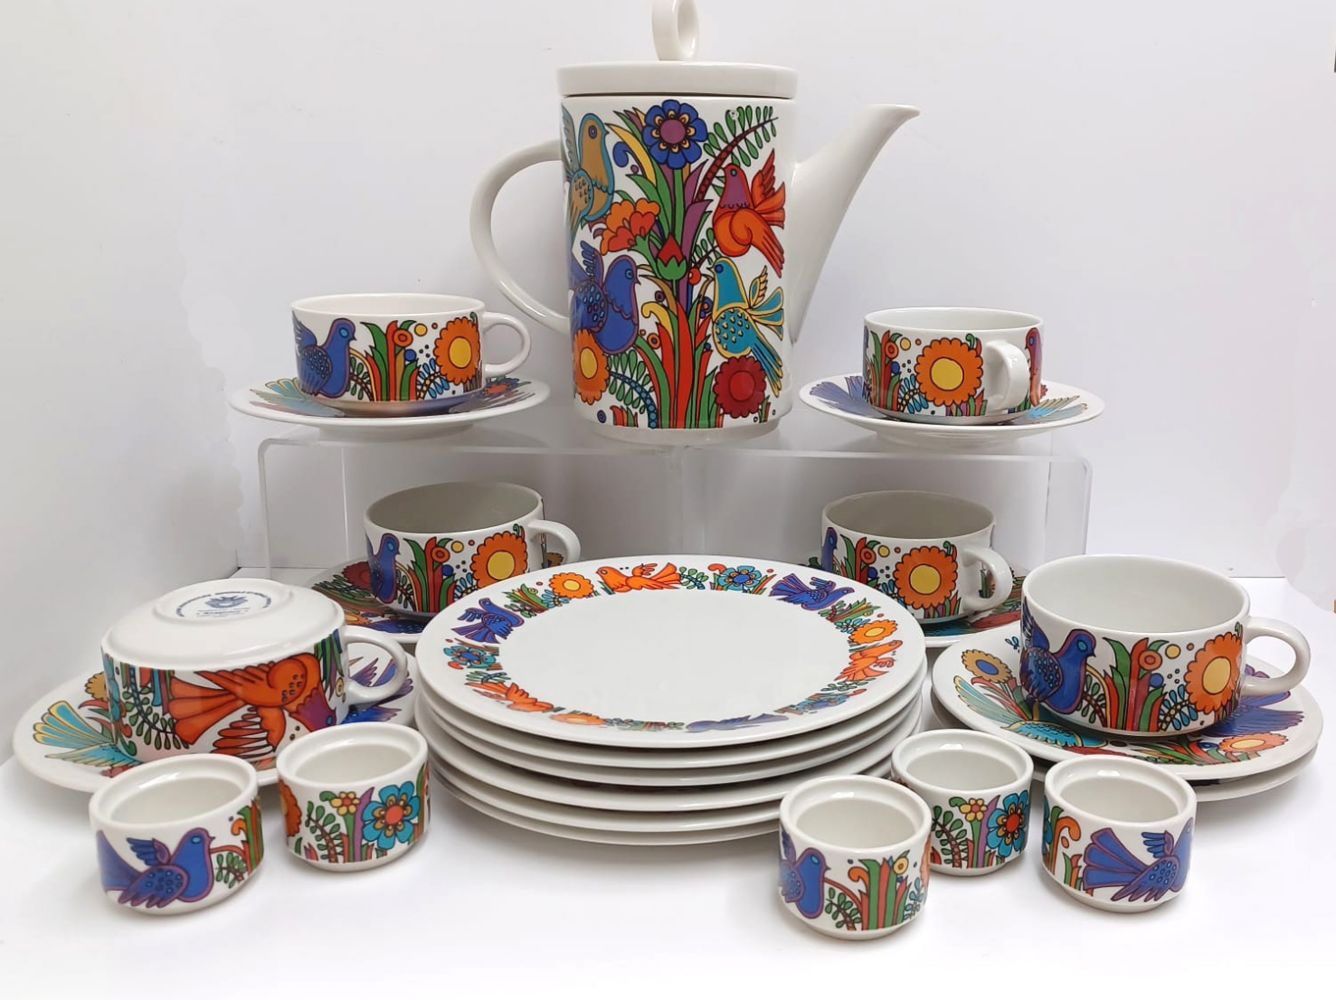 Antiques and Collectables Stock Clearance - Last Chance....Low Reserves